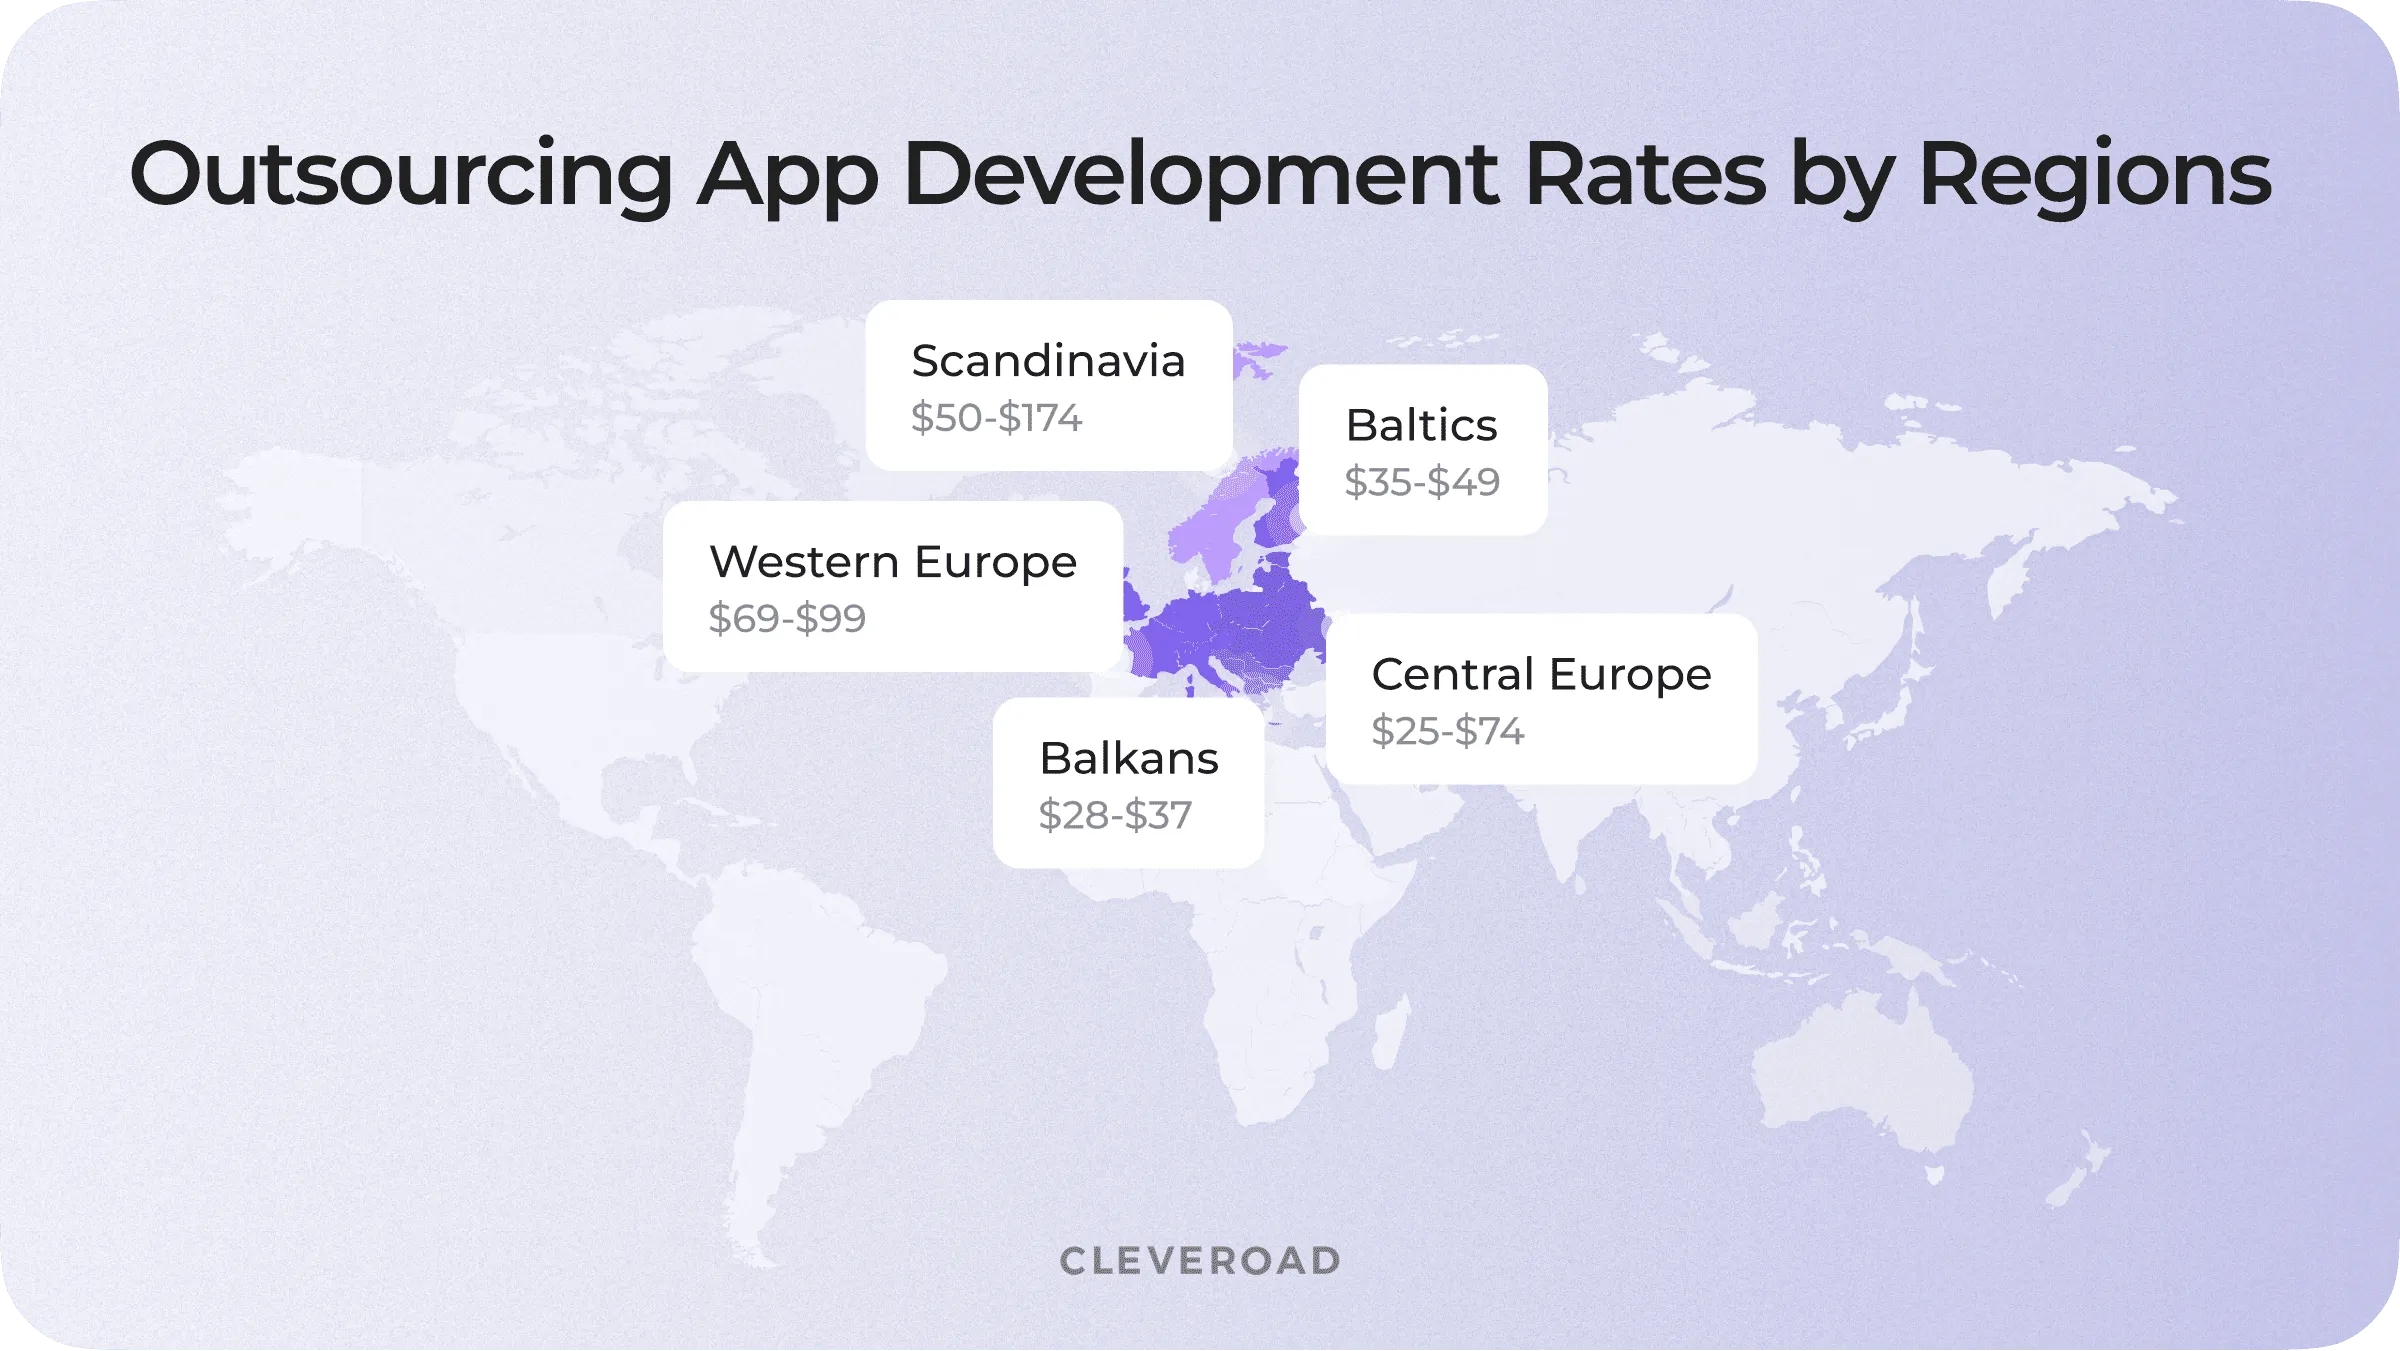 Outsourcing app development rates globally